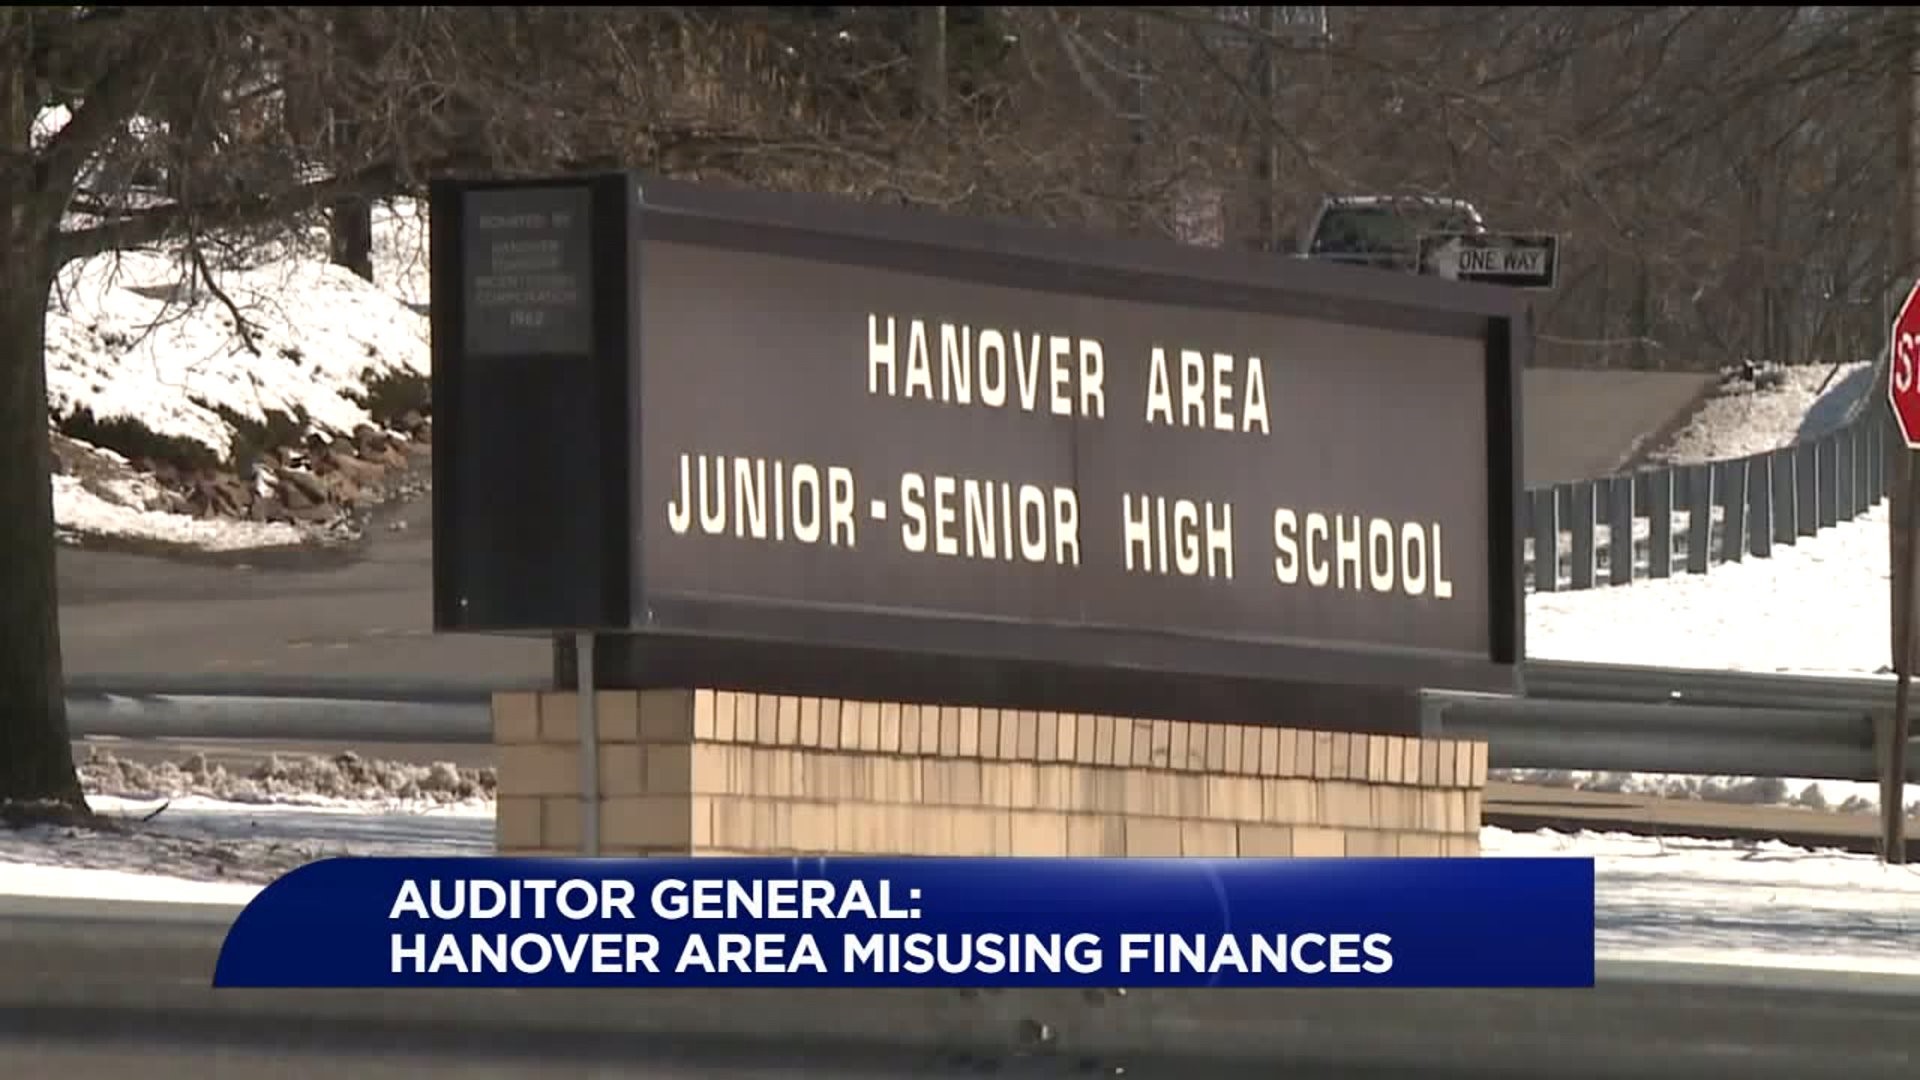 PA Auditor General: Hanover Area Misusing Finances